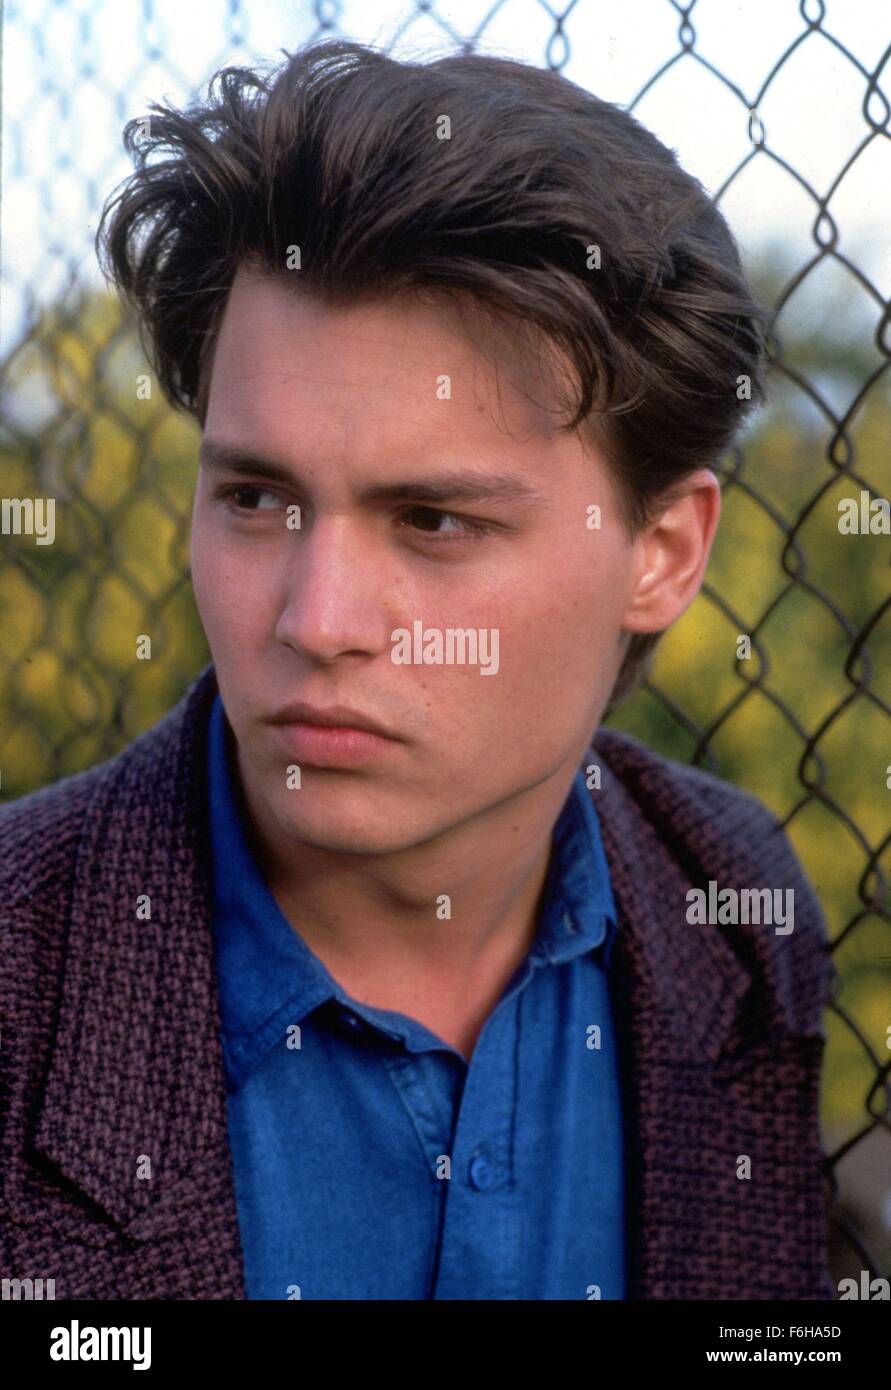 1989, Film Title: 21 JUMP STREET, Pictured: JOHNNY DEPP, FENCE, CHICKEN WIRE, WIRE FENCE, HEAD SHOT, PORTRAIT, STUDIO, LOOKING AWAY. (Credit Image: SNAP) Stock Photo